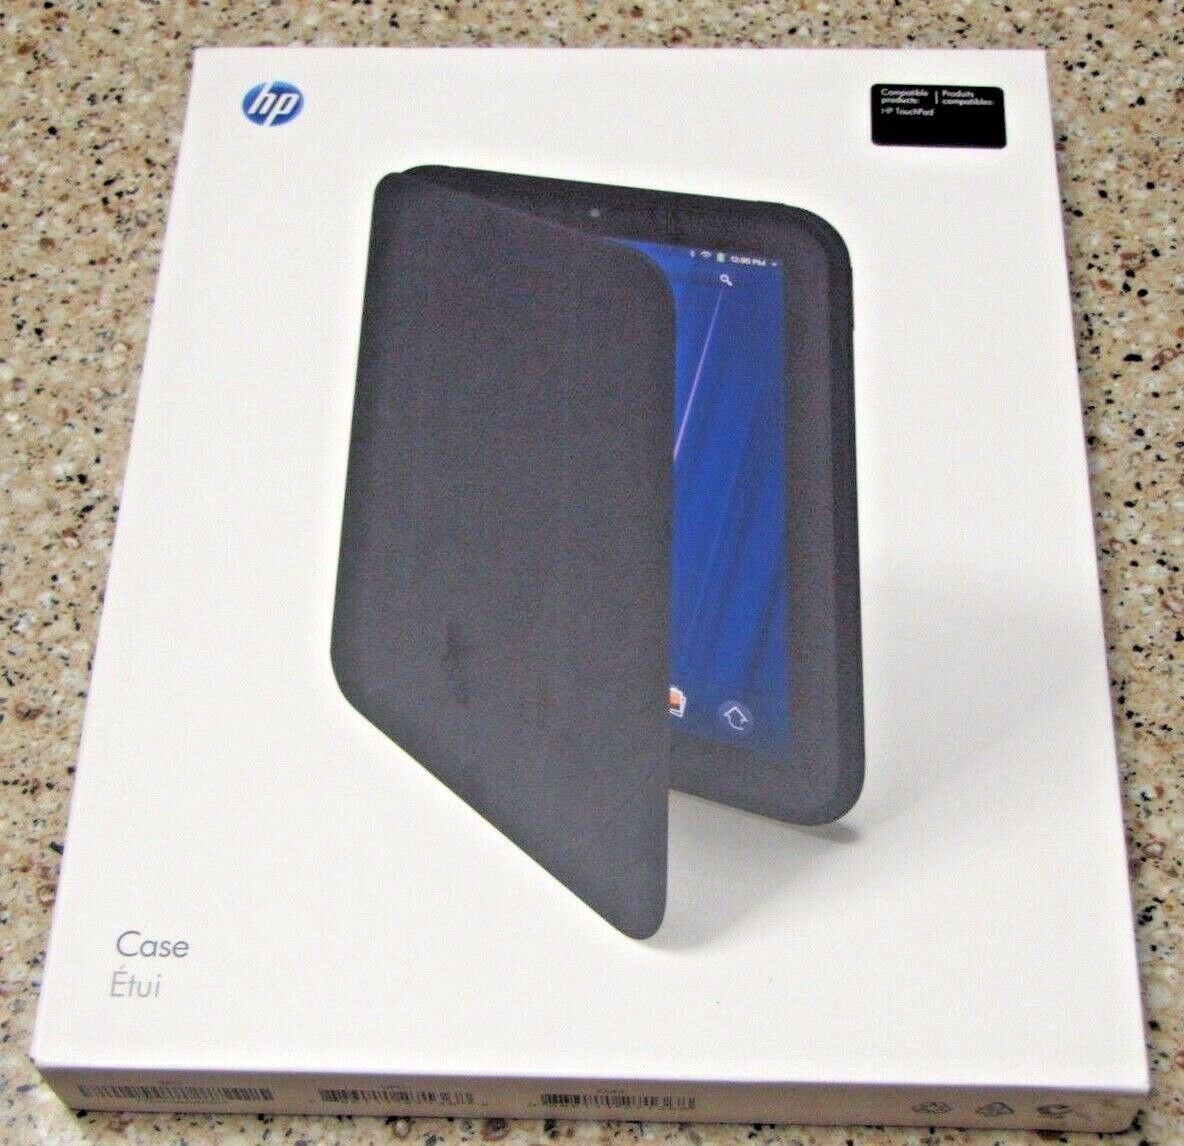 Genuine HP Touchpad Tablet Case Folio FB343AA#AC3 Sealed OEM Official Original